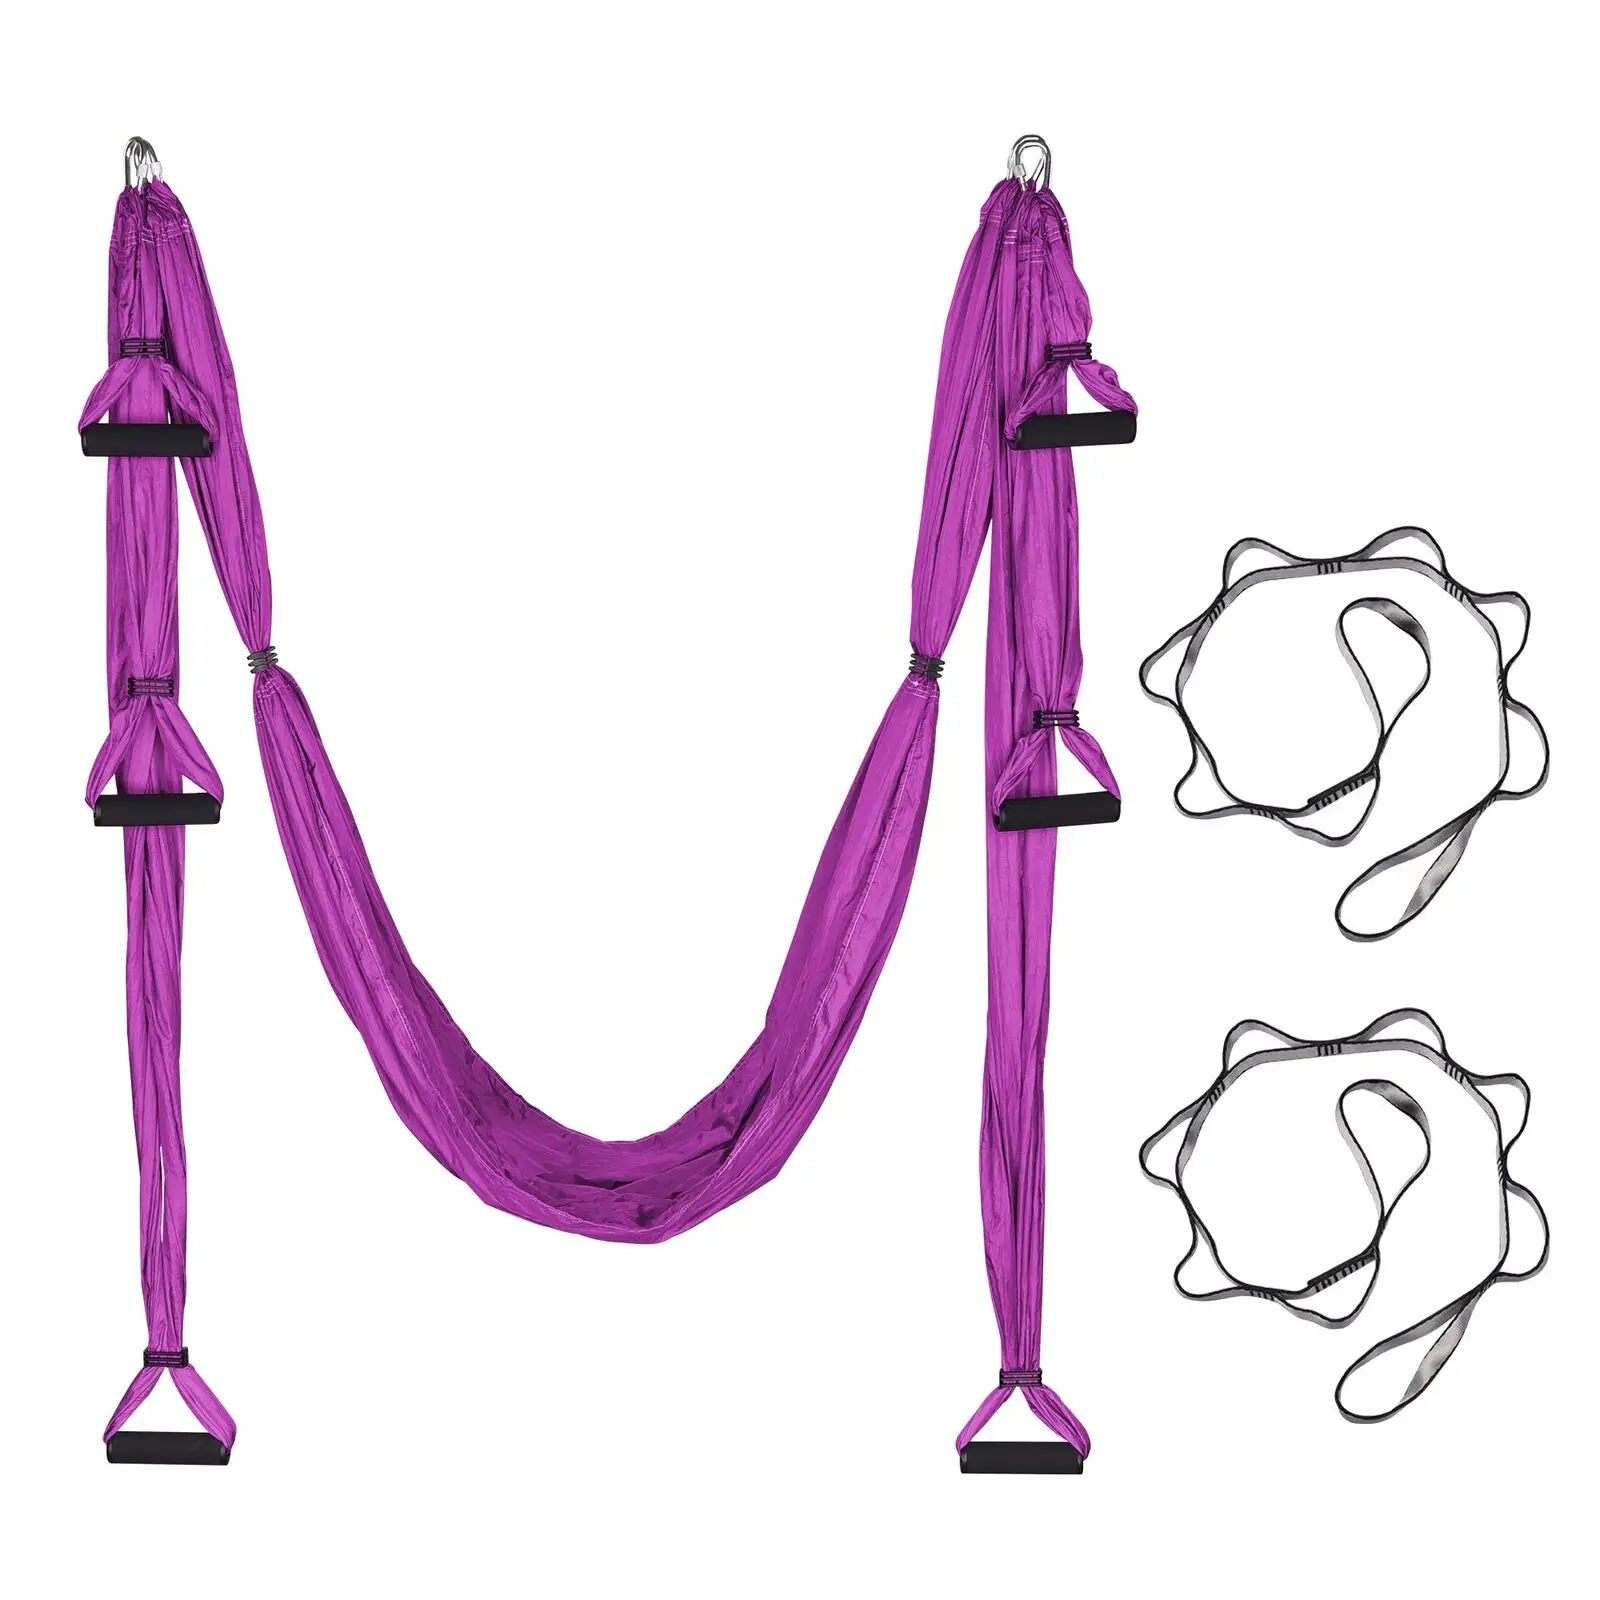 

Aerial Yoga Flying Trapeze Swing Set with 6 Thick Foam Padded Handles Purple